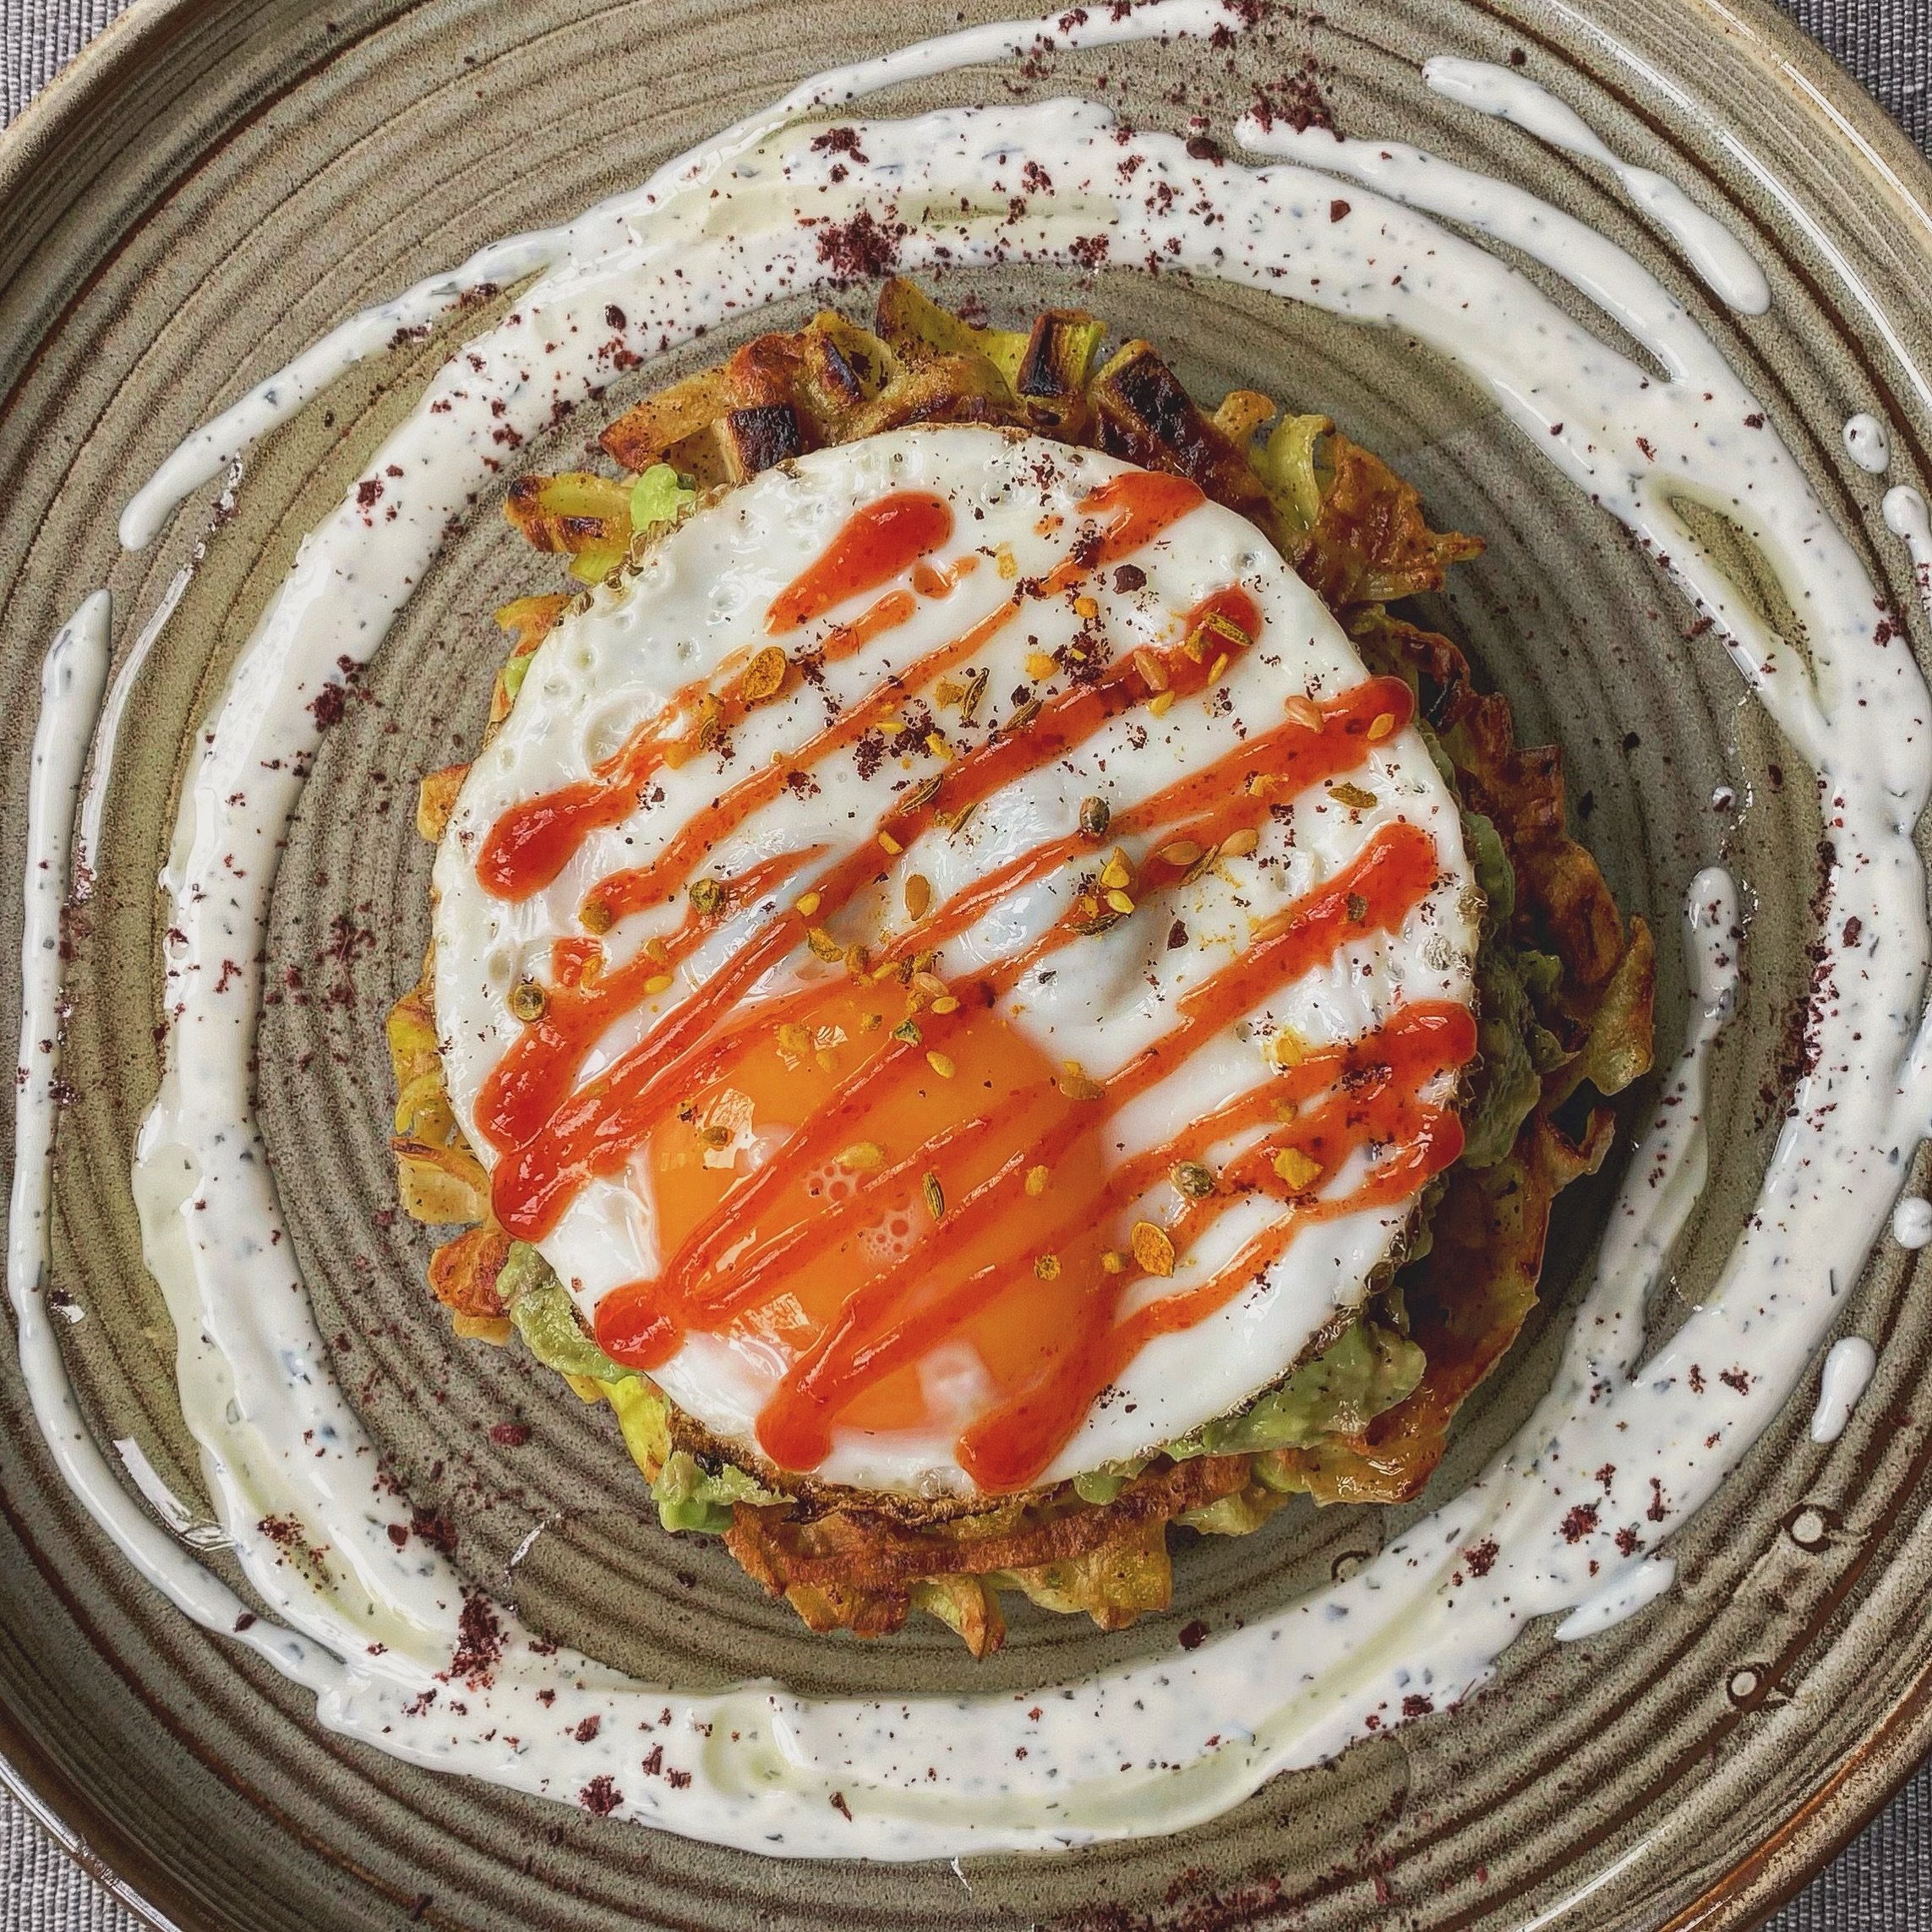 🚨Daily special: a leek bhaji topped with avocado, fried egg, sriracha sauce, dukkah and a mint yogurt raita. It&rsquo;s a bit of a flavour explosion!!! 💥👌🏻😋